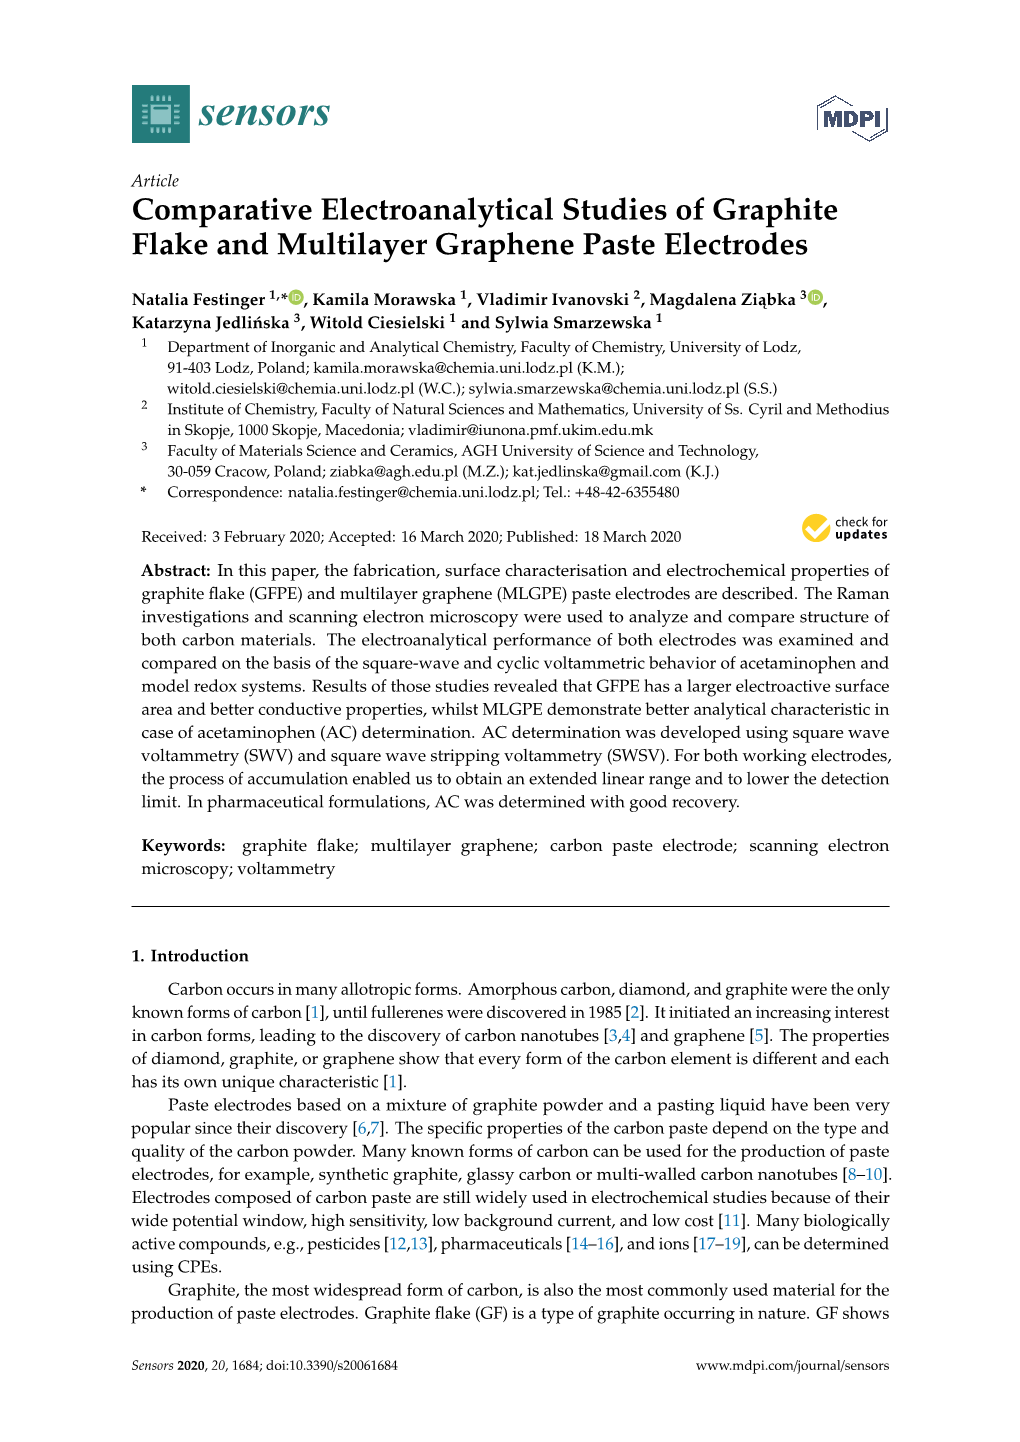 Comparative Electroanalytical Studies of Graphite Flake and Multilayer Graphene Paste Electrodes